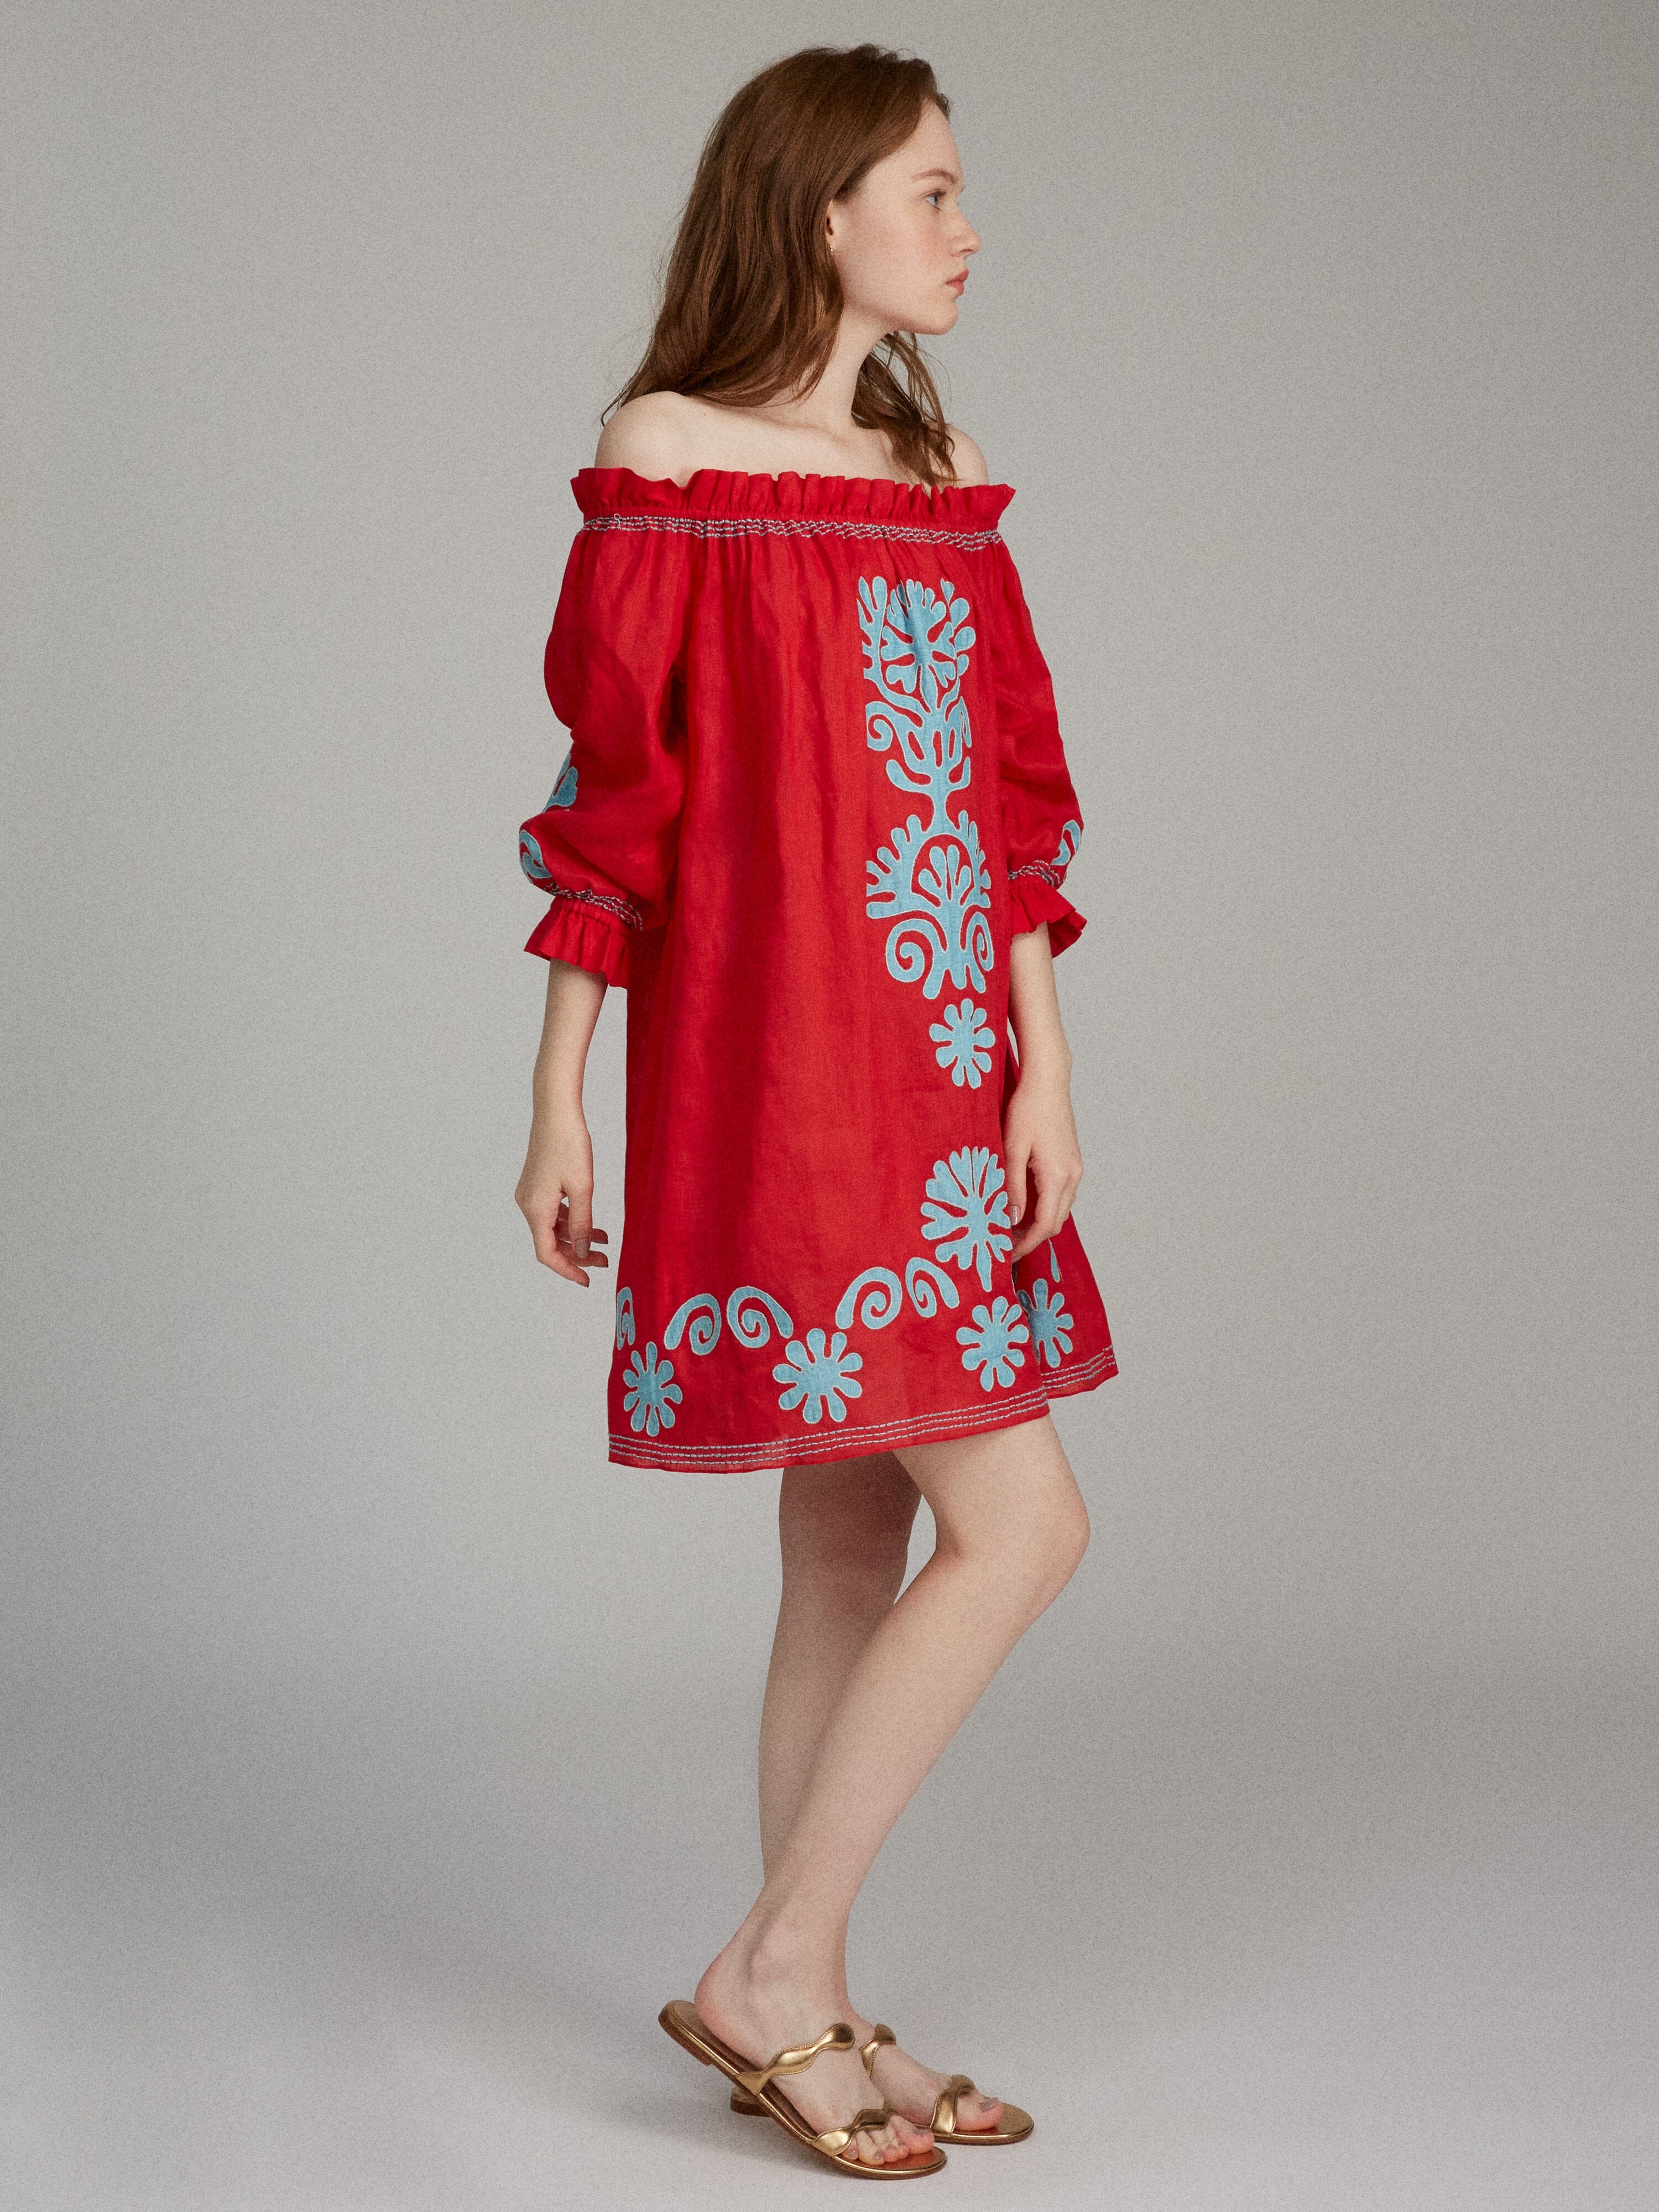 Gaby Short Dress in Cherry Red with Sky Embroidery